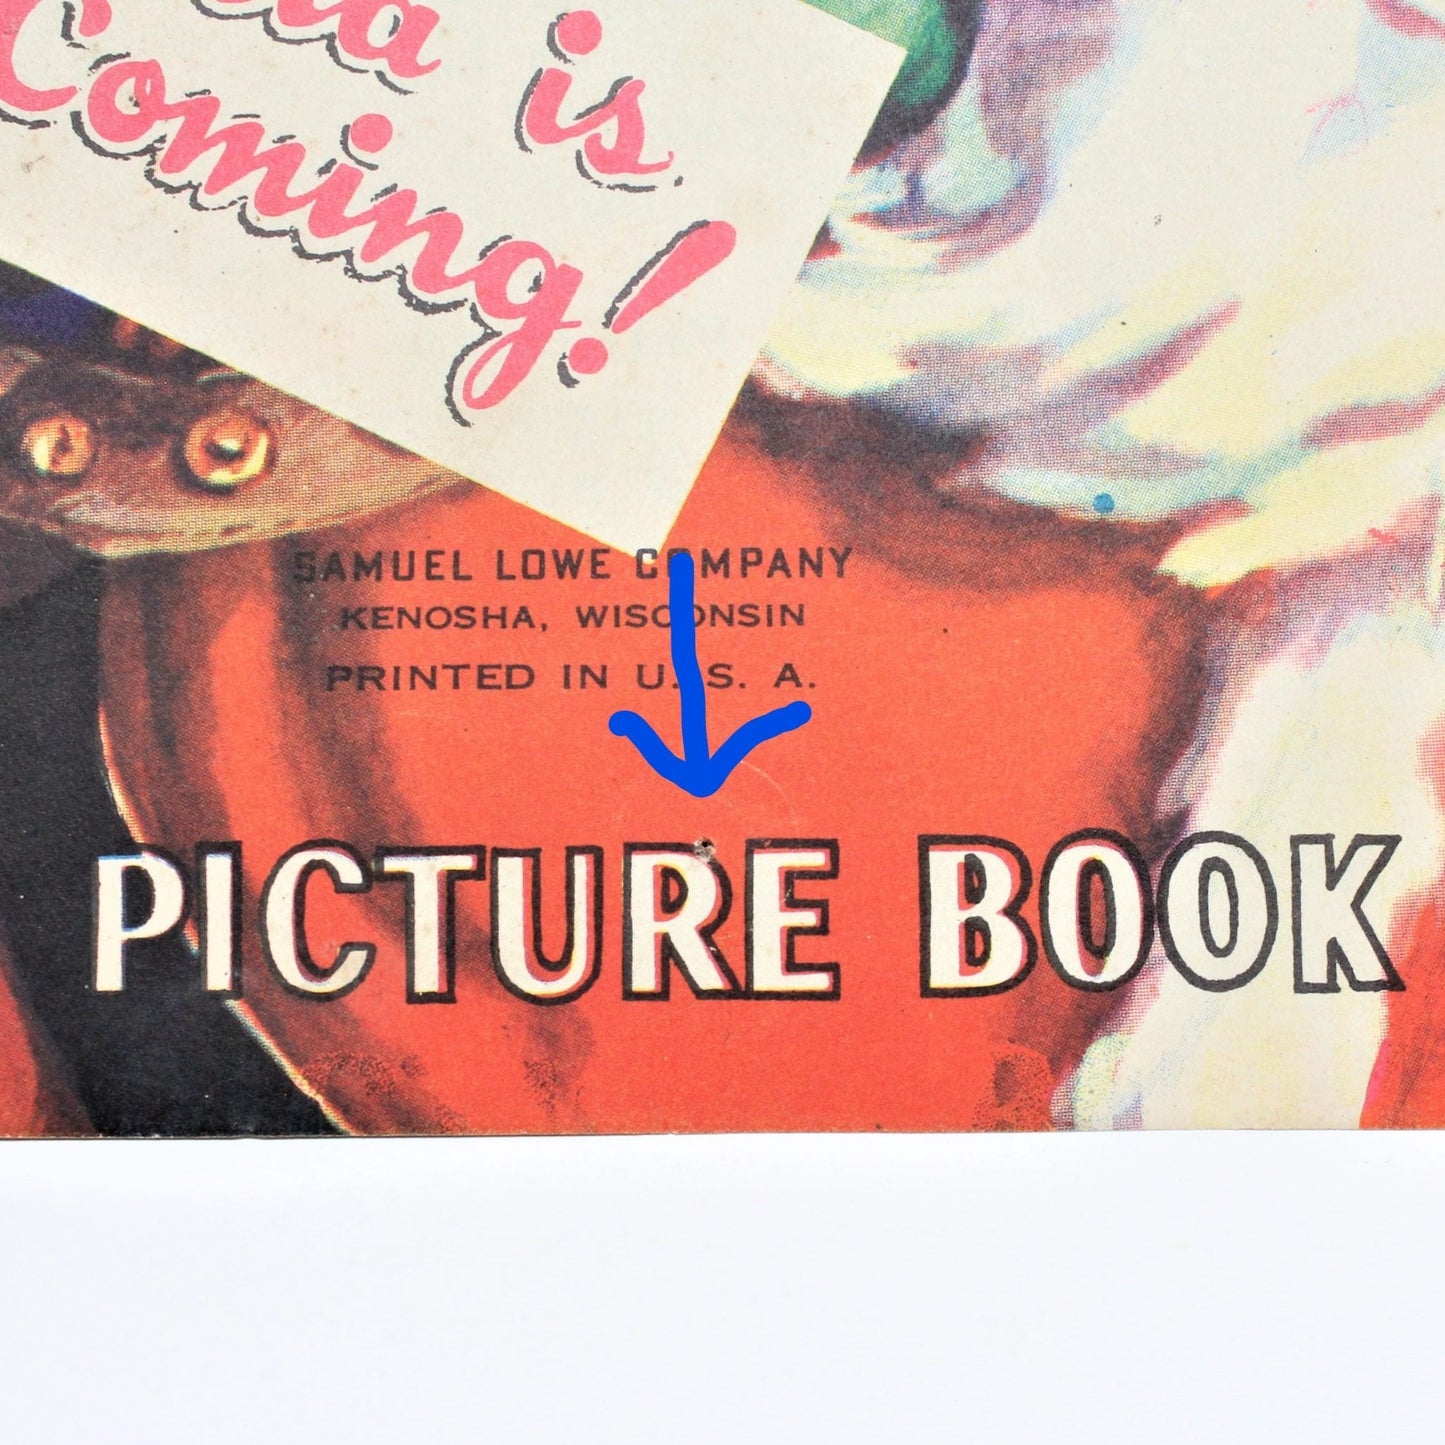 Children's Book, Samuel Lowe Co, Santa is Coming!, Softcover Litho, 1951 Vintage, RARE